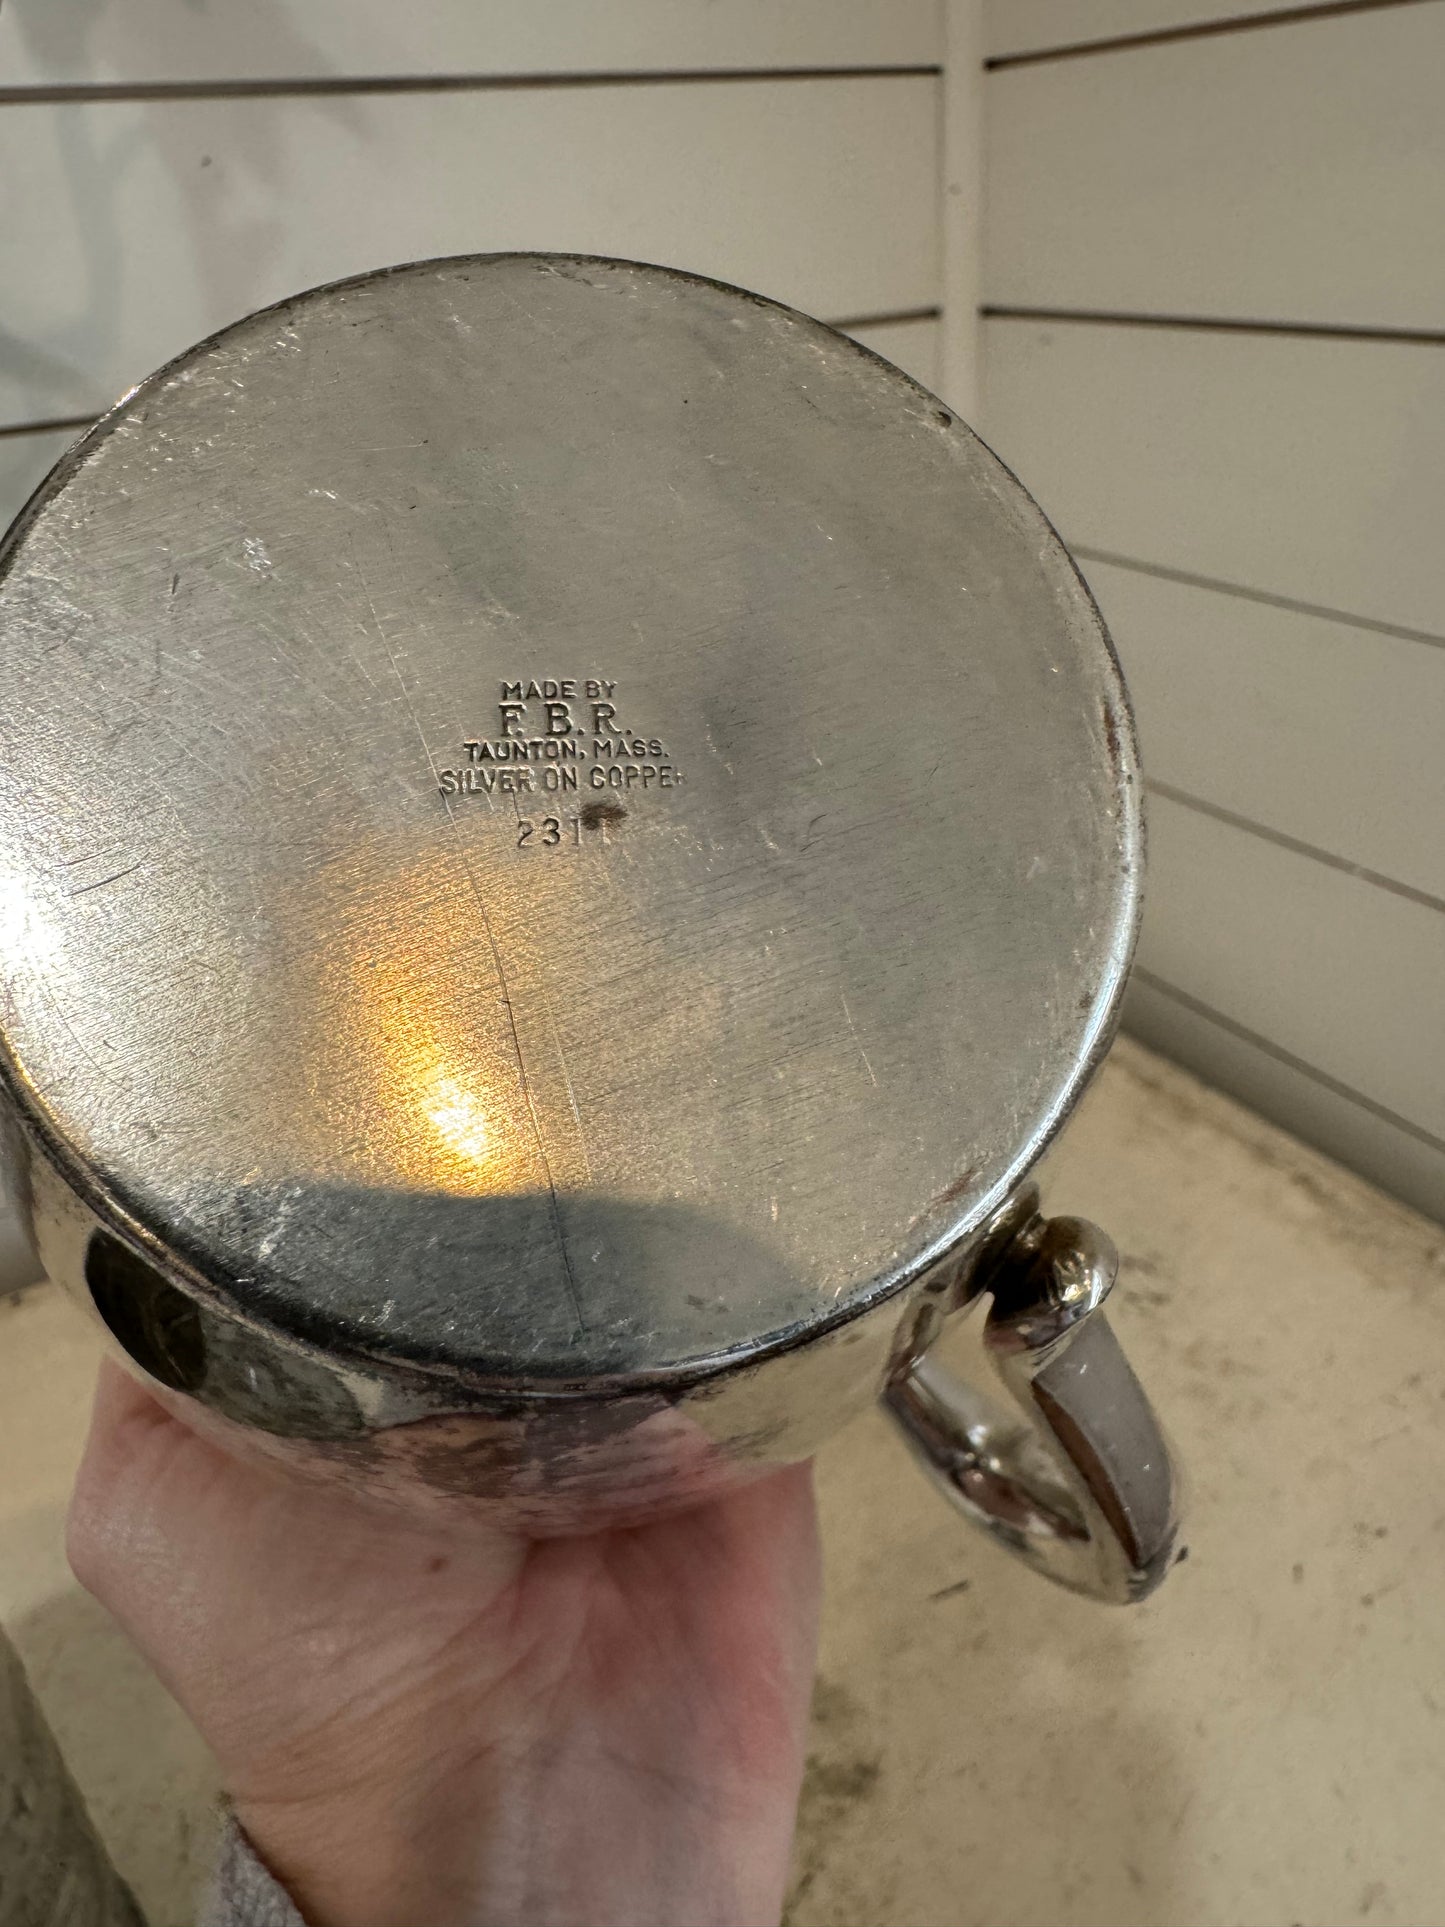 Tarnished Silver Kettle missing Lid - Silver over Copper